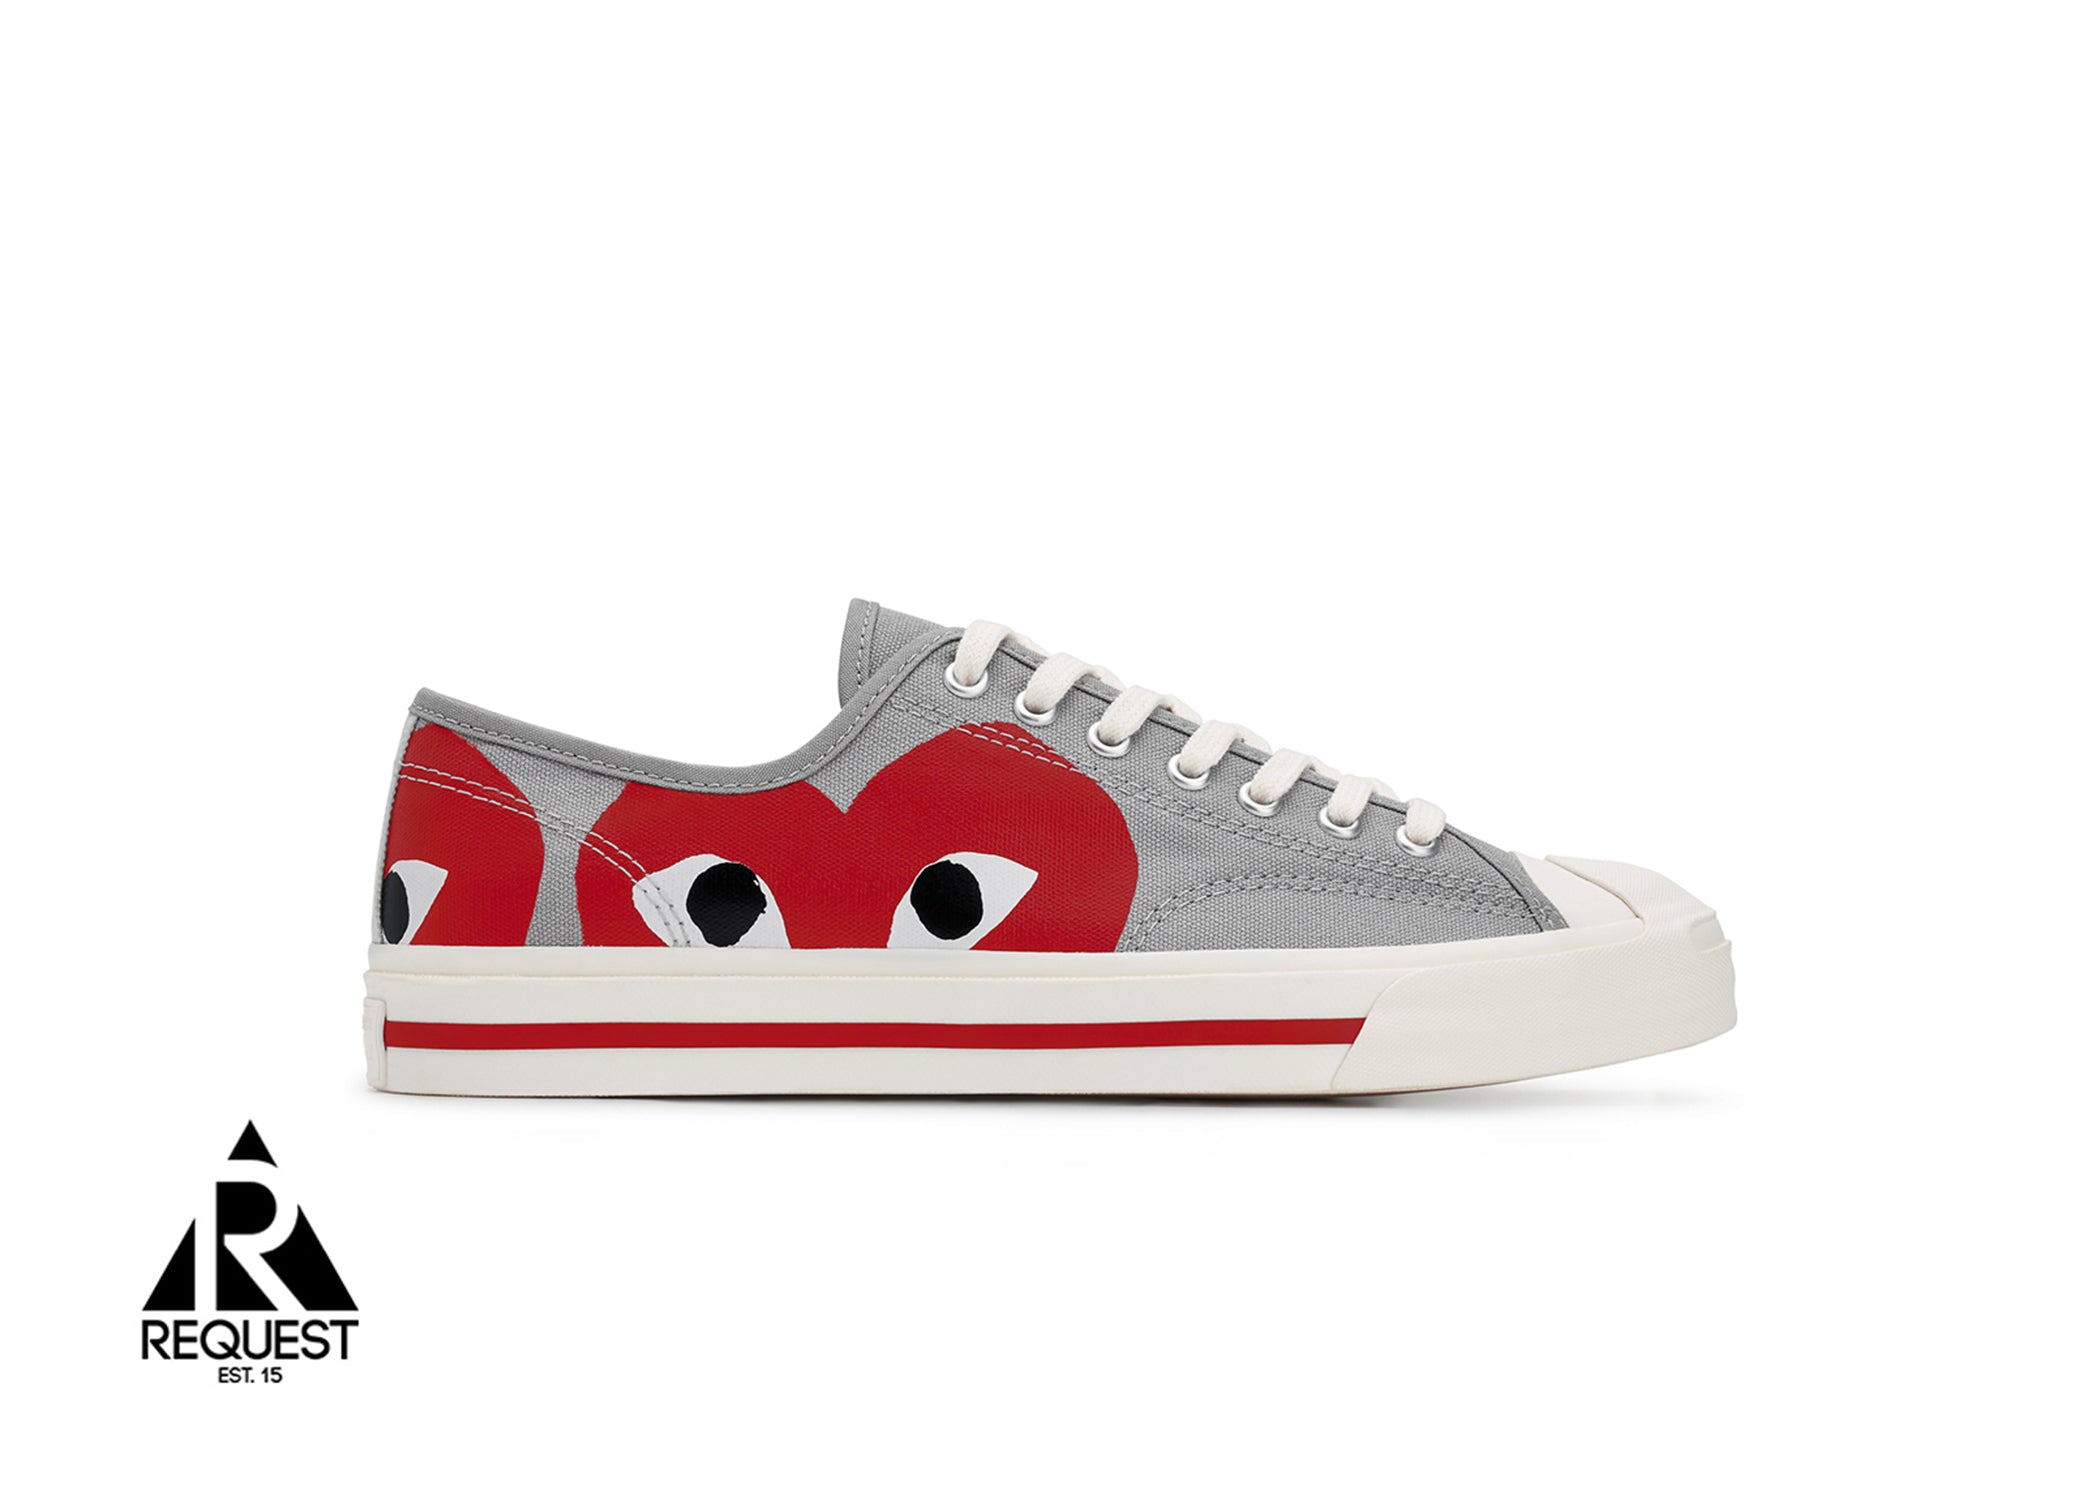 Converse Jack Purcell CDG “Grey Red”